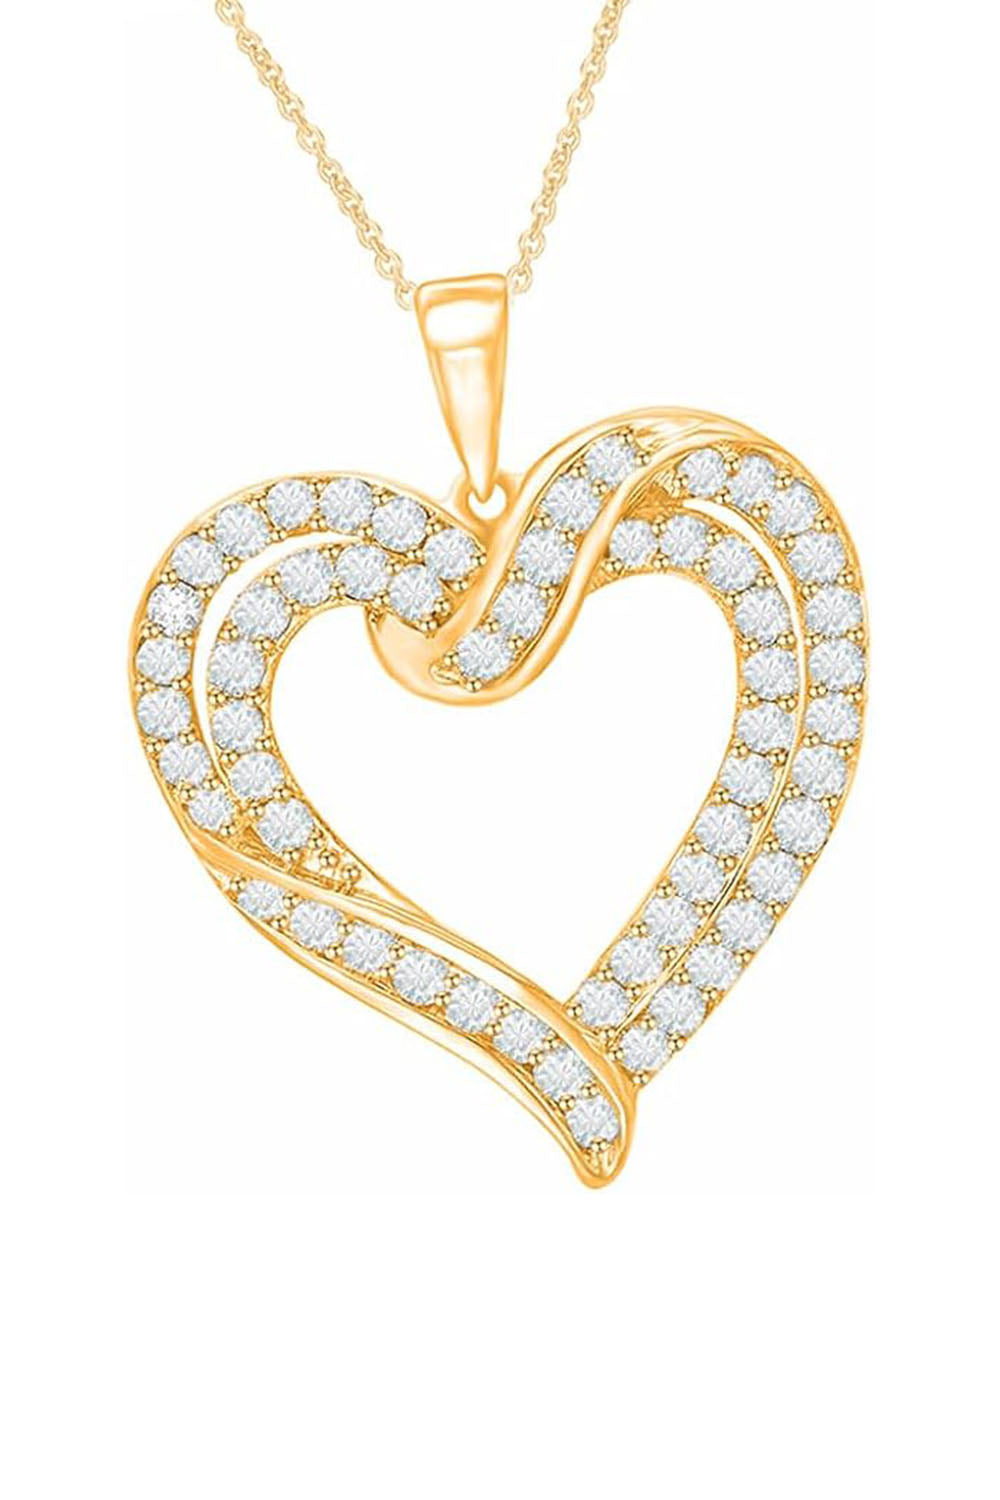 Yellow Gold Color Round Cut Moissanite Love Heart Pendant Necklace